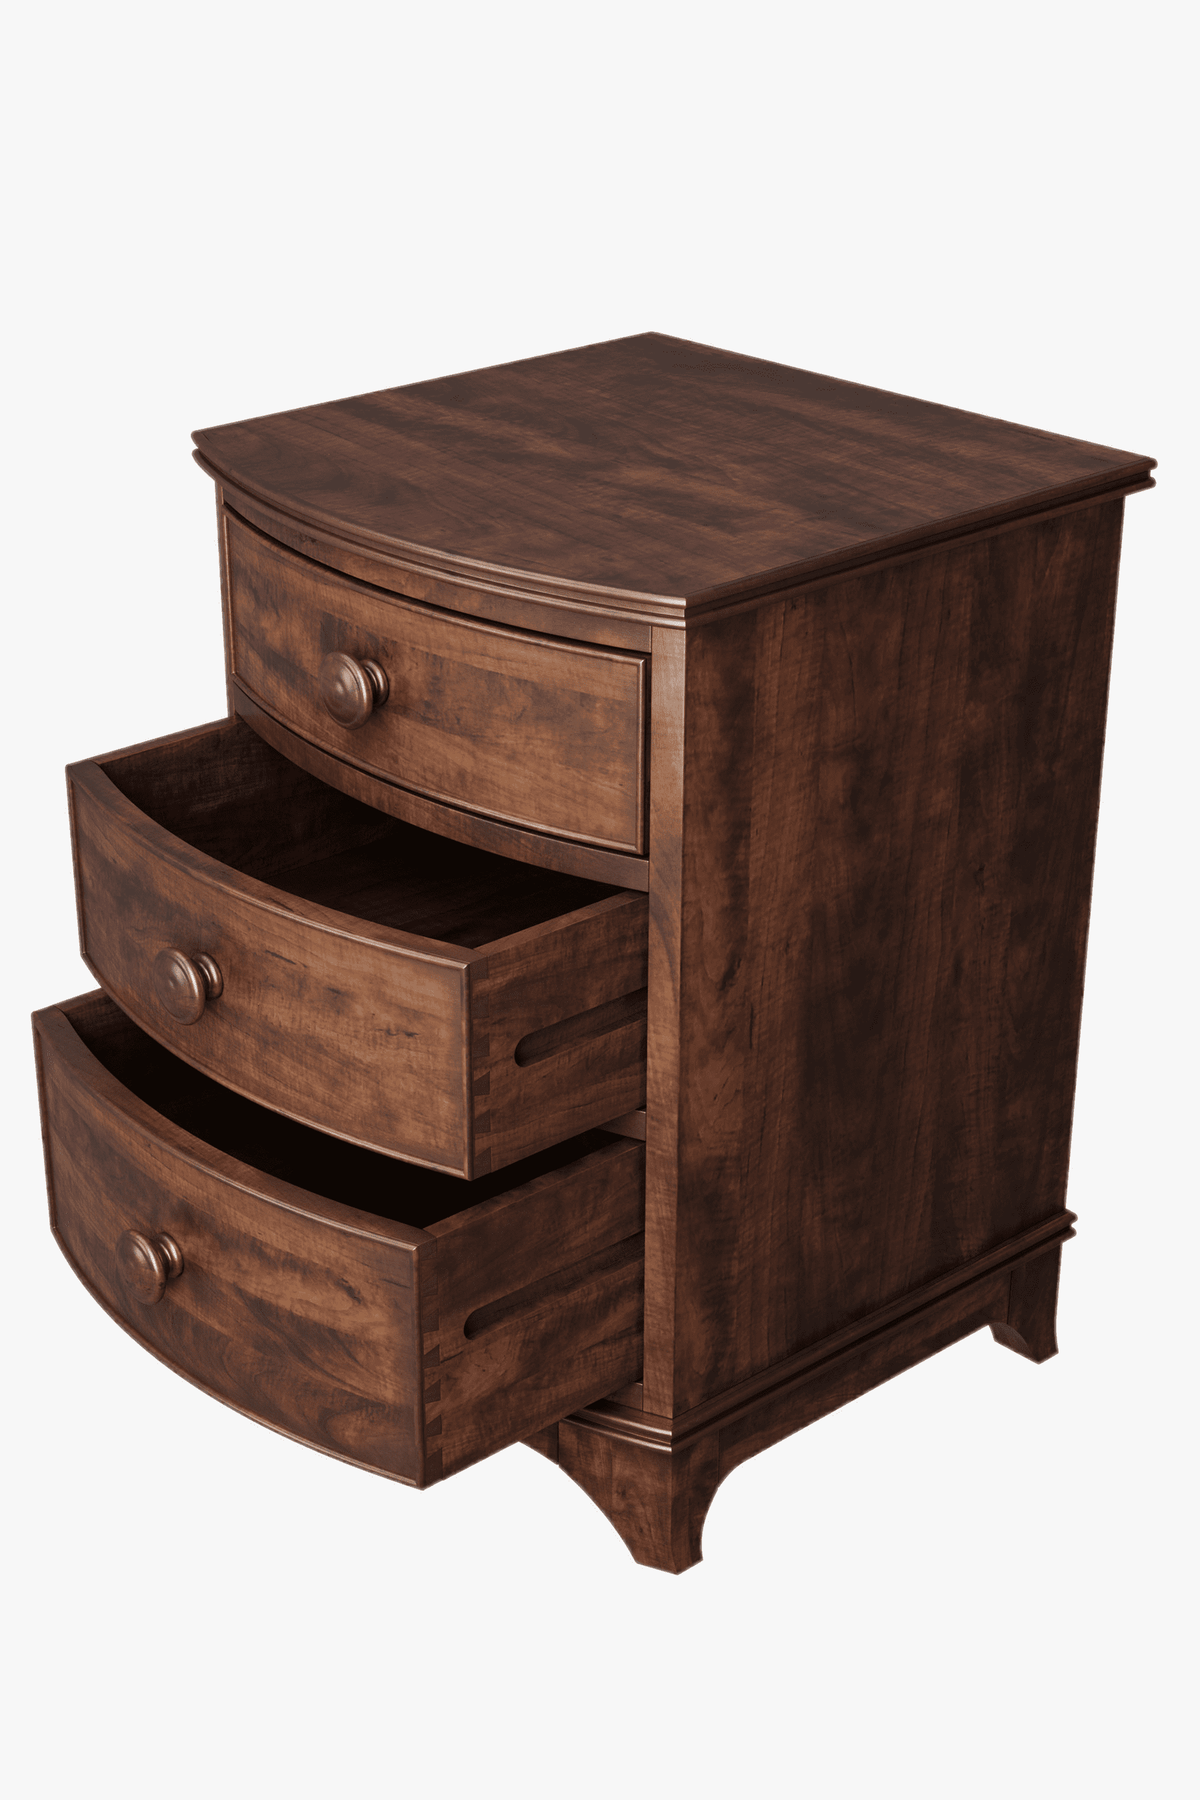 Broughton 3 Drawer Bedside Table